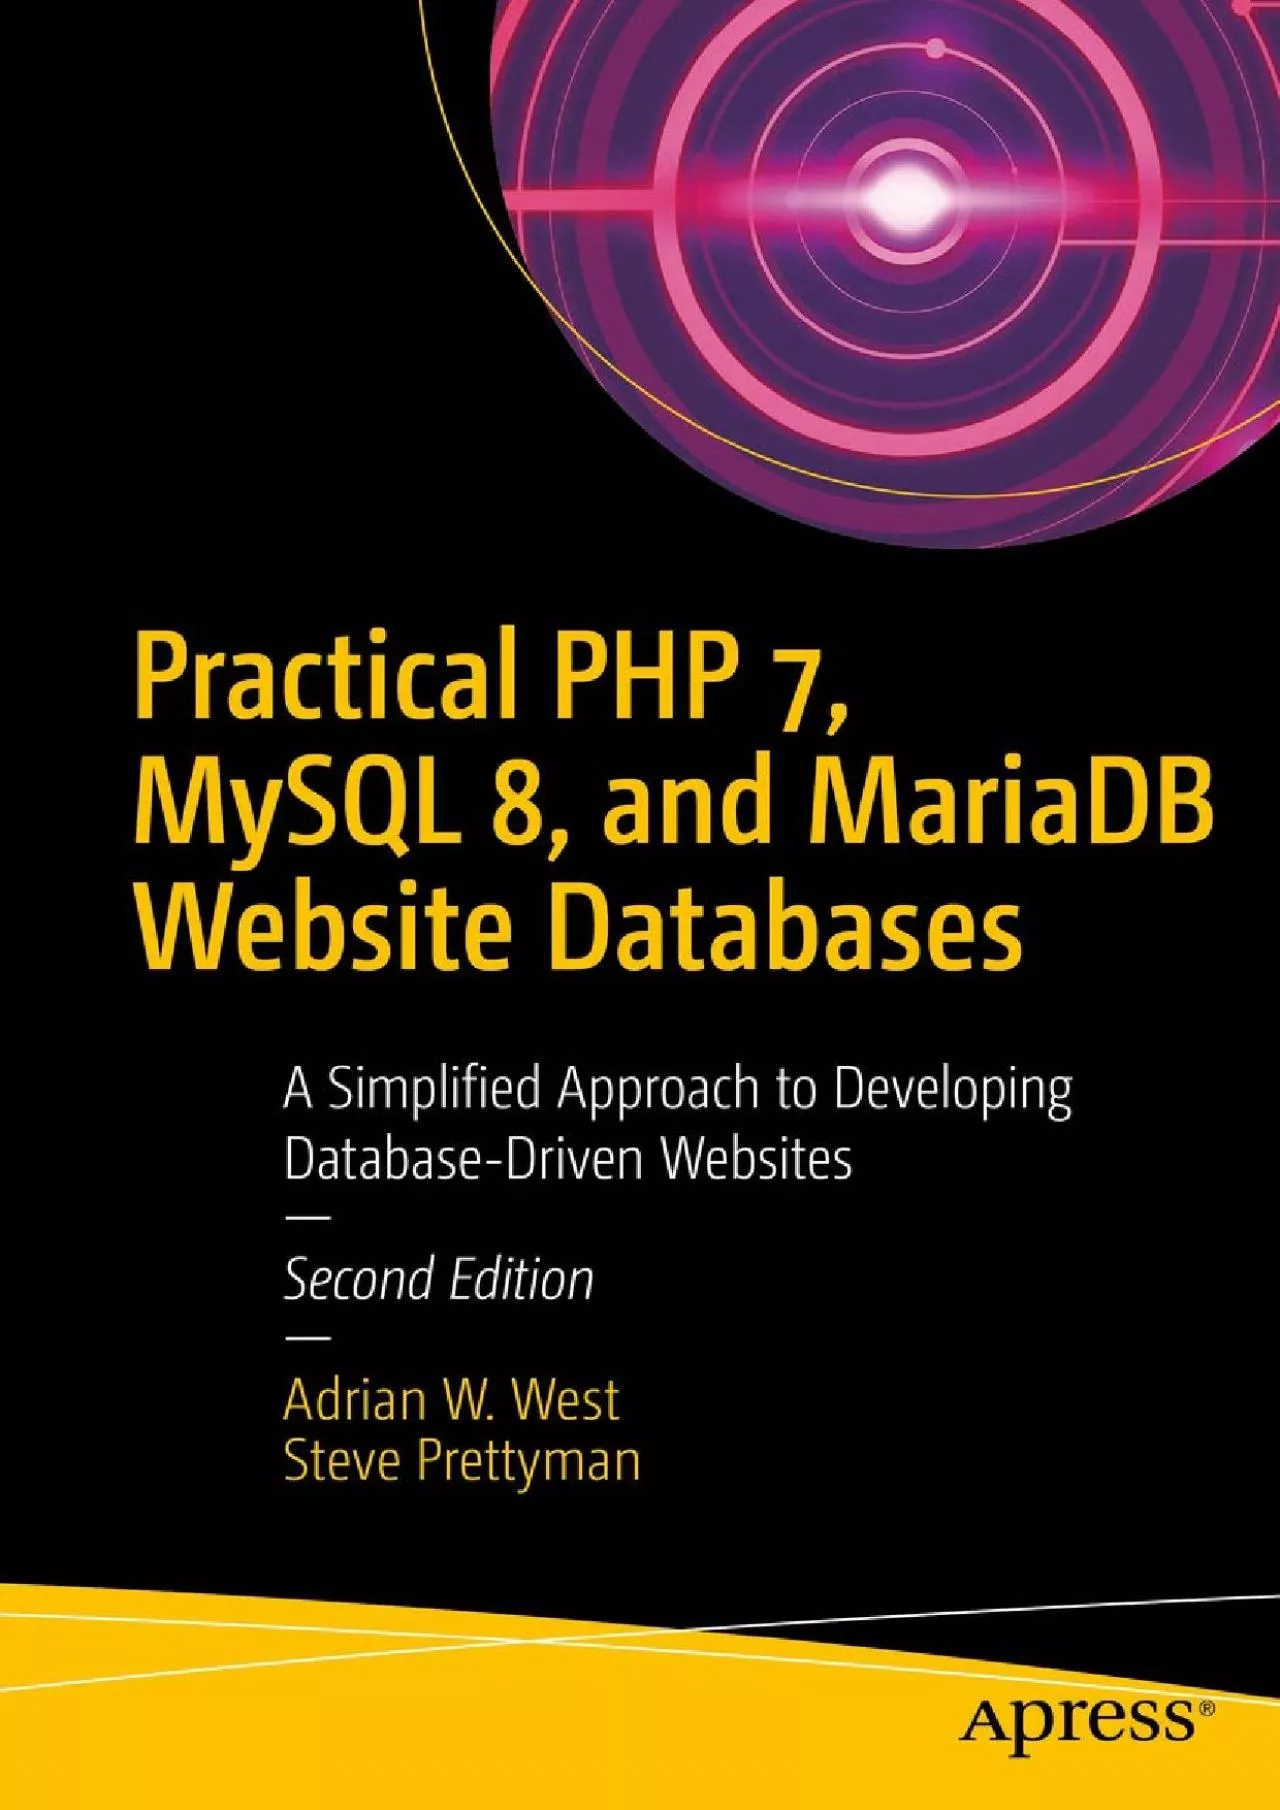 [PDF]-Practical PHP 7, MySQL 8, and MariaDB Website Databases: A Simplified Approach to